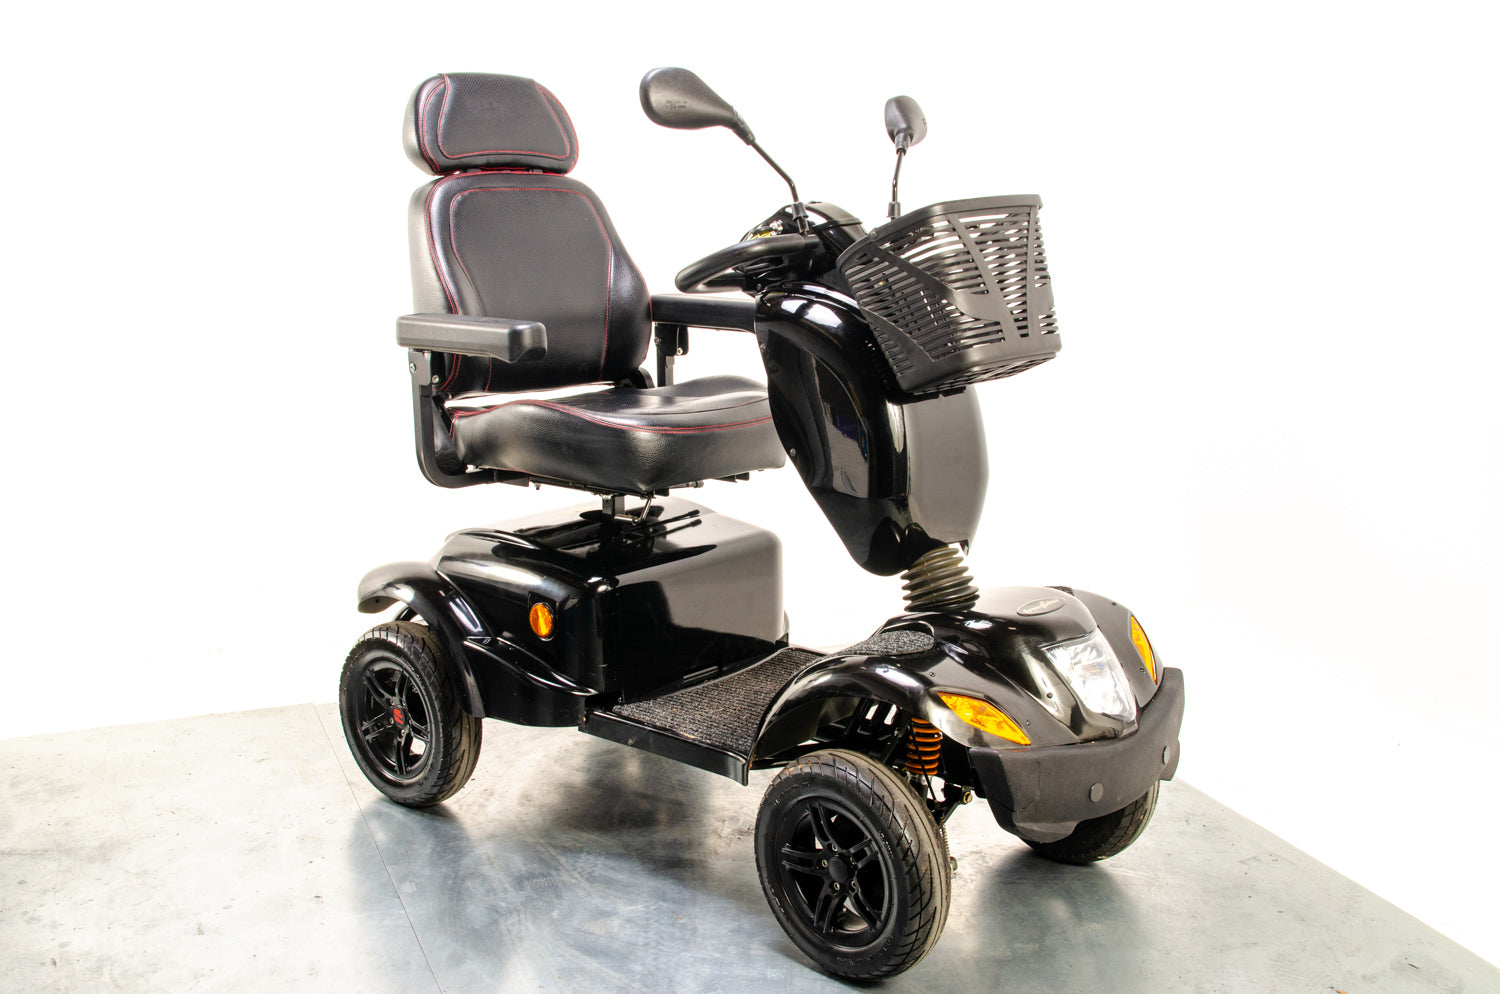 Freerider Landranger XL8 8mph Used Mobility Scooter All-Terrain Off-Road Road Legal Large 03512